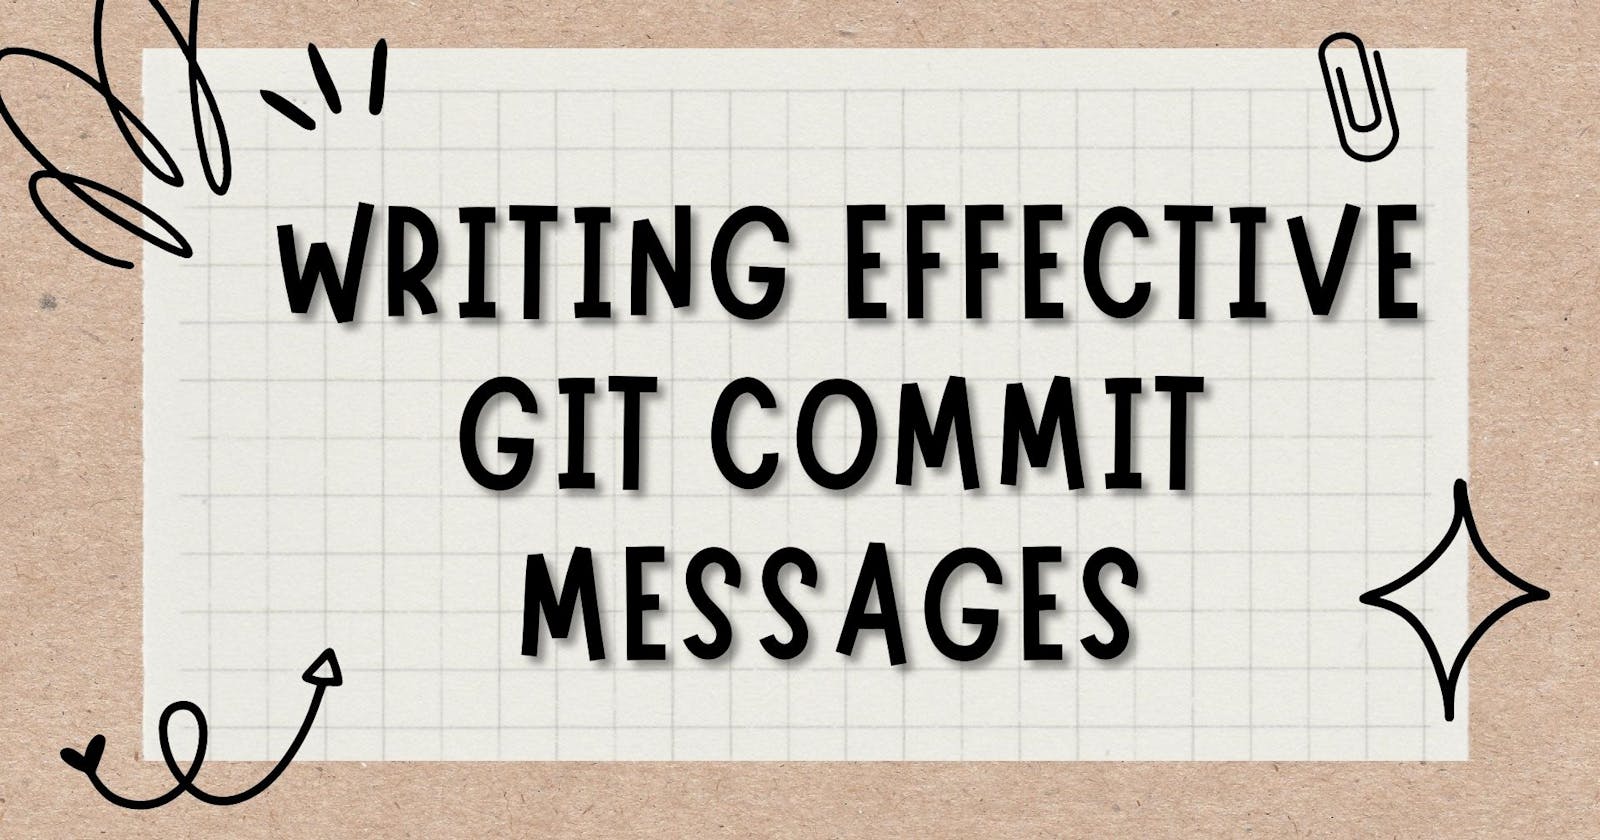 📝: A Guide for Writing Effective Git Commit Messages